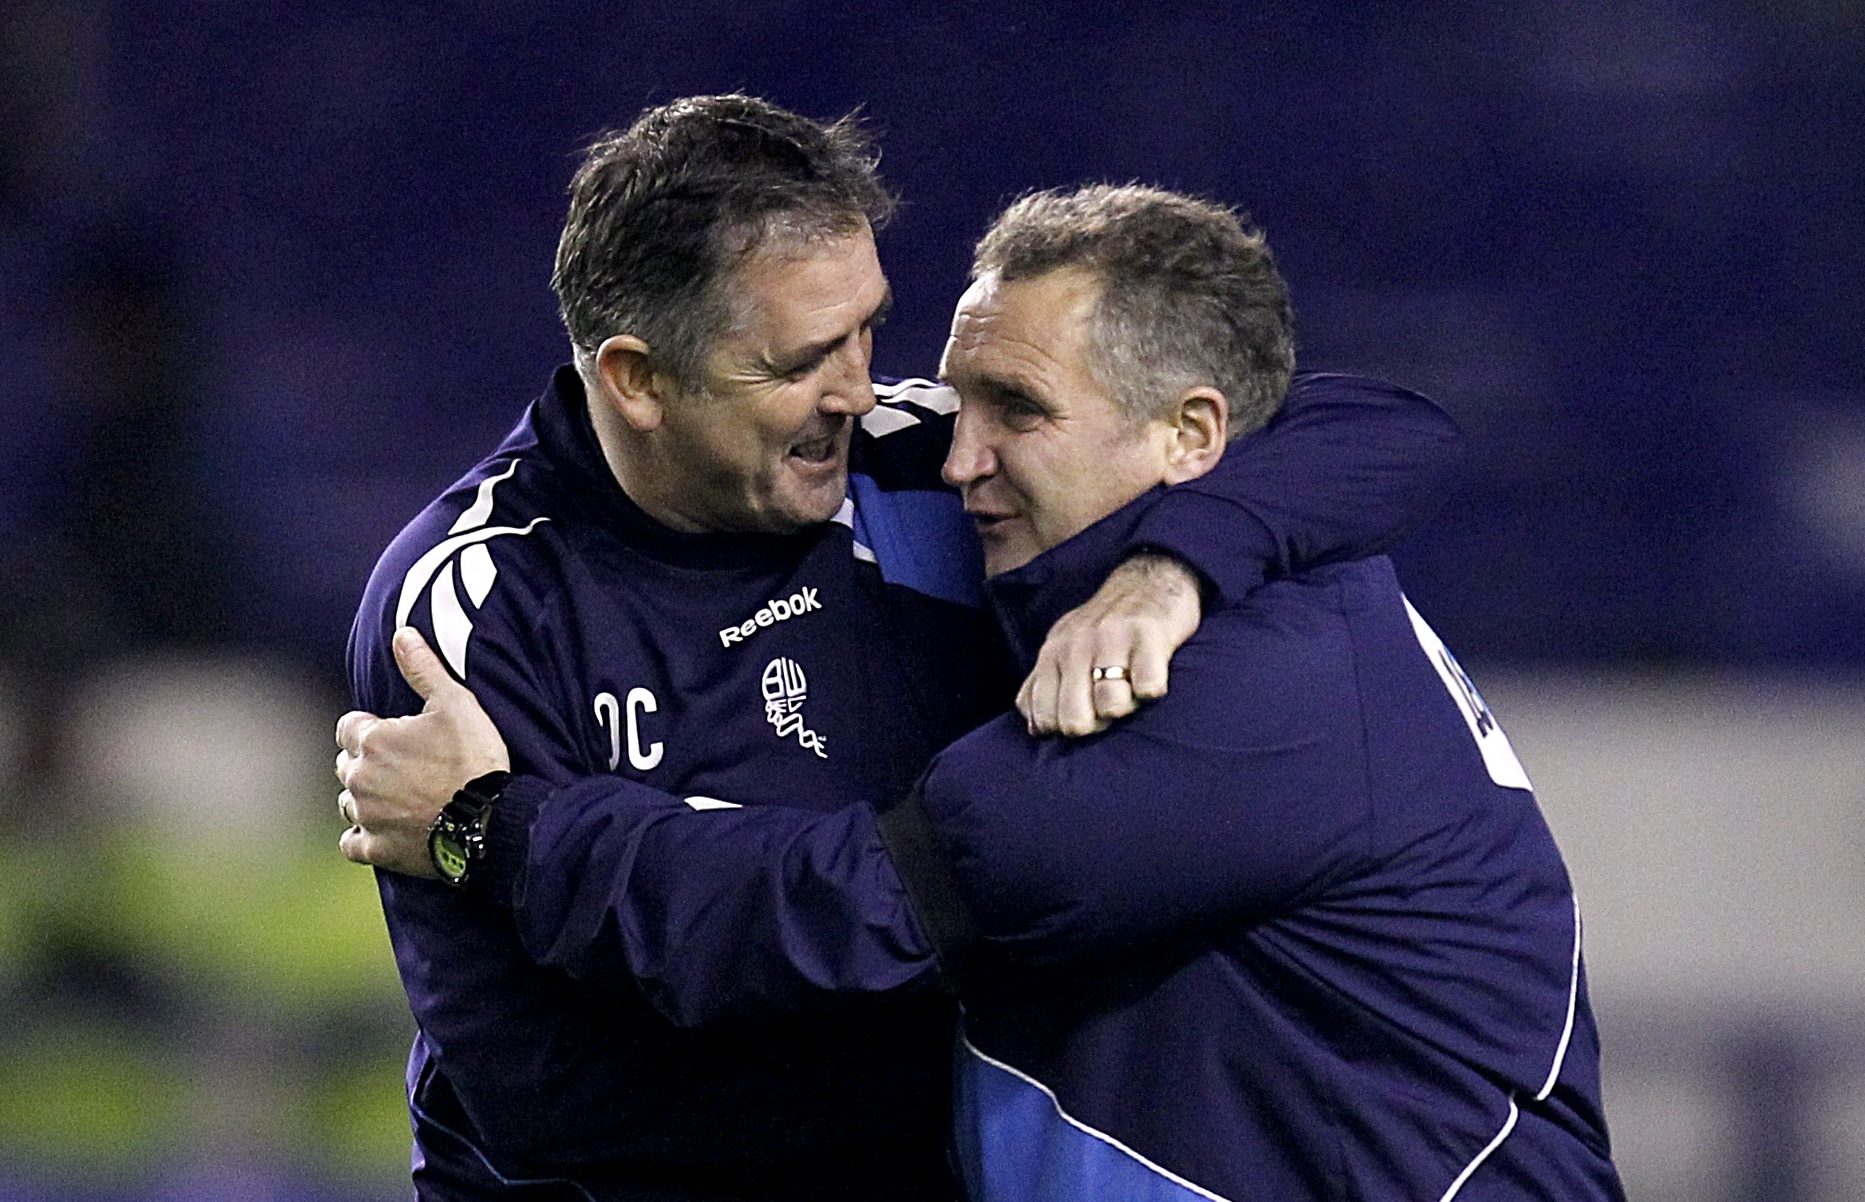 Owen Coyle and Sandy Stewart have enjoyed happy times together and aim to continue that in India